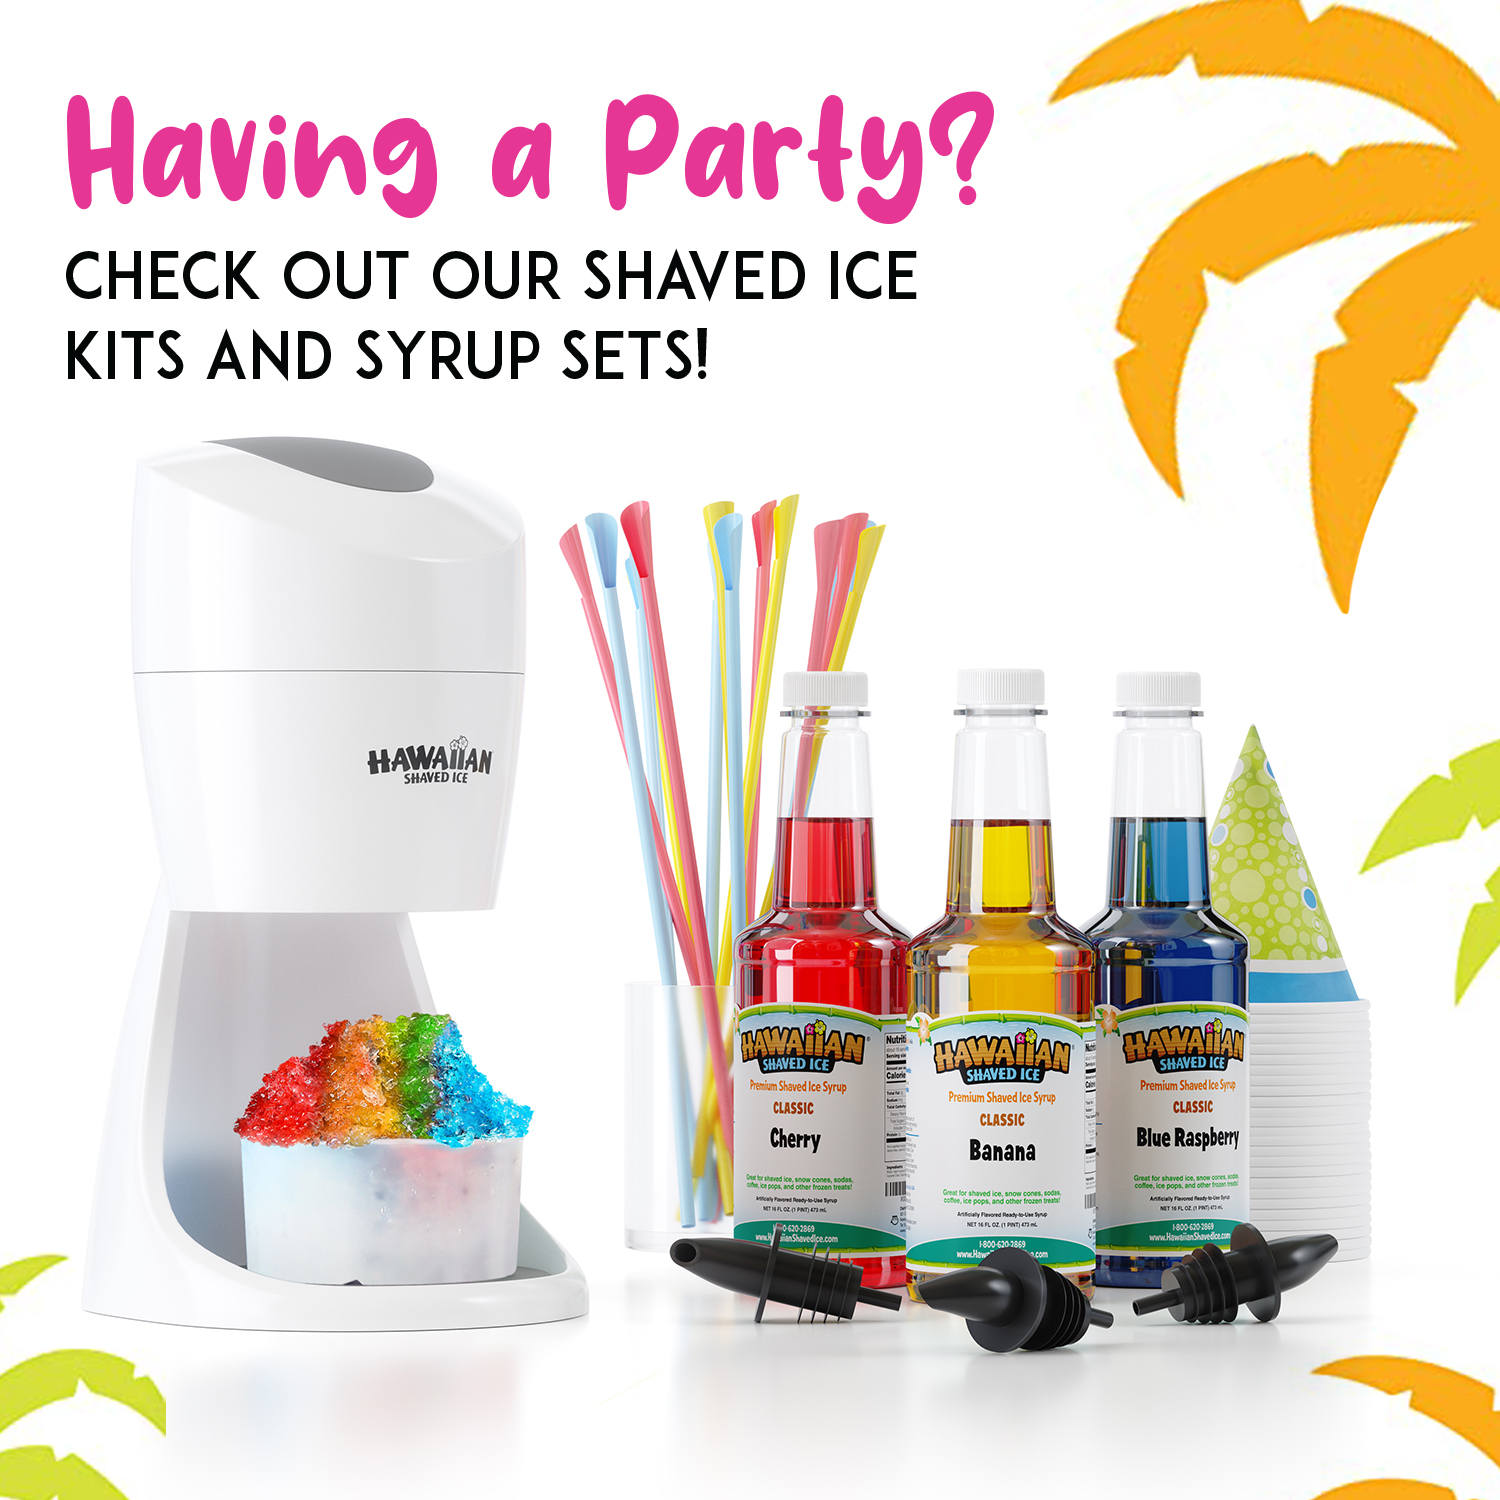 Hawaiian Shaved Ice S900a Electric Shaved Ice Machine